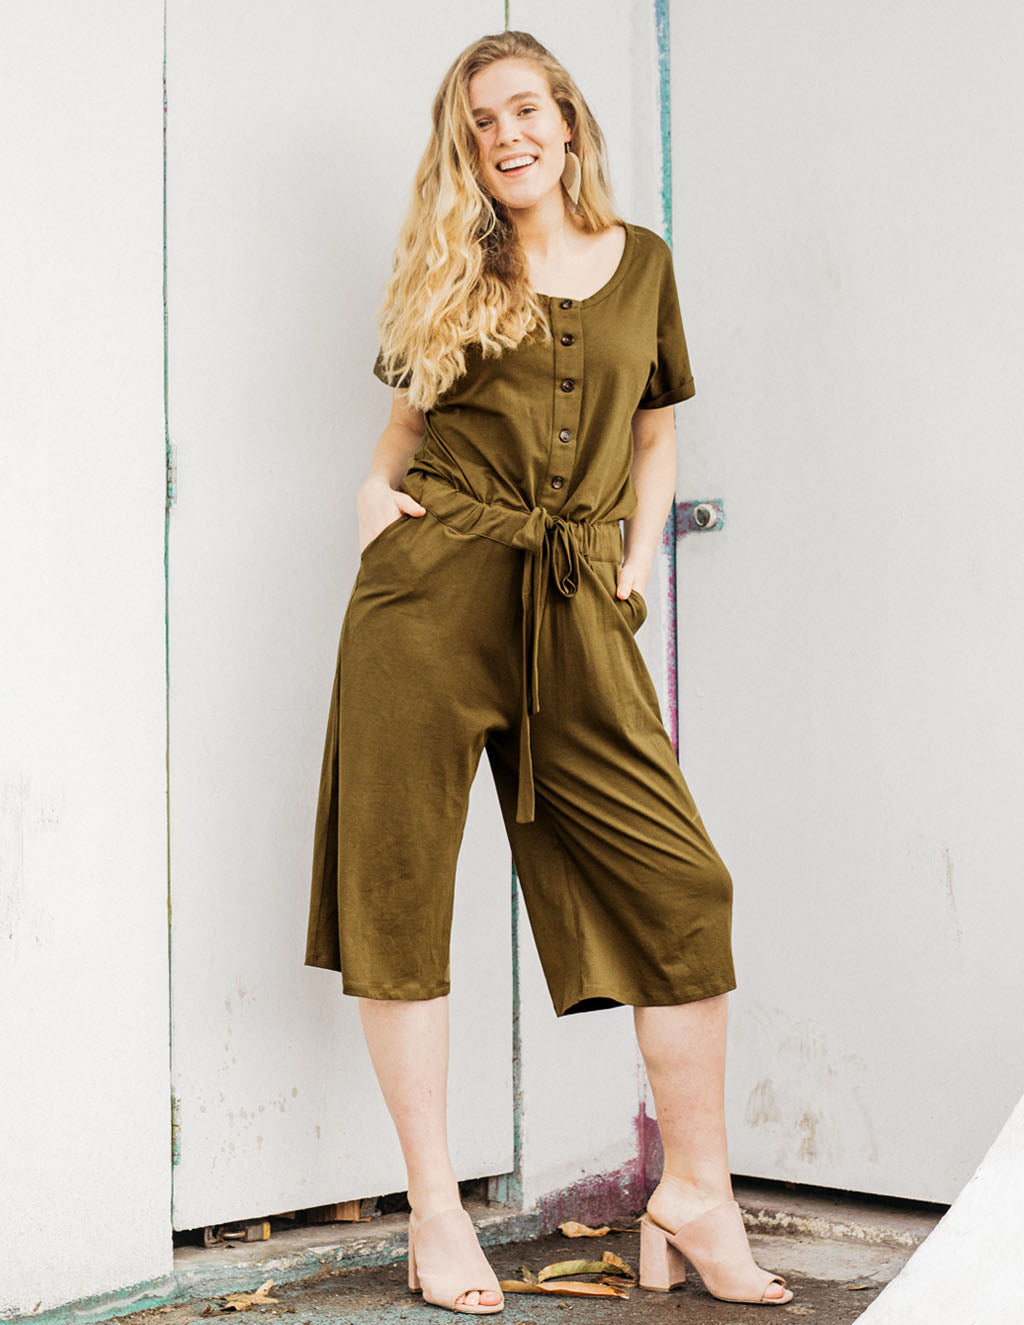 HALLIE jumpsuit in Military Olive